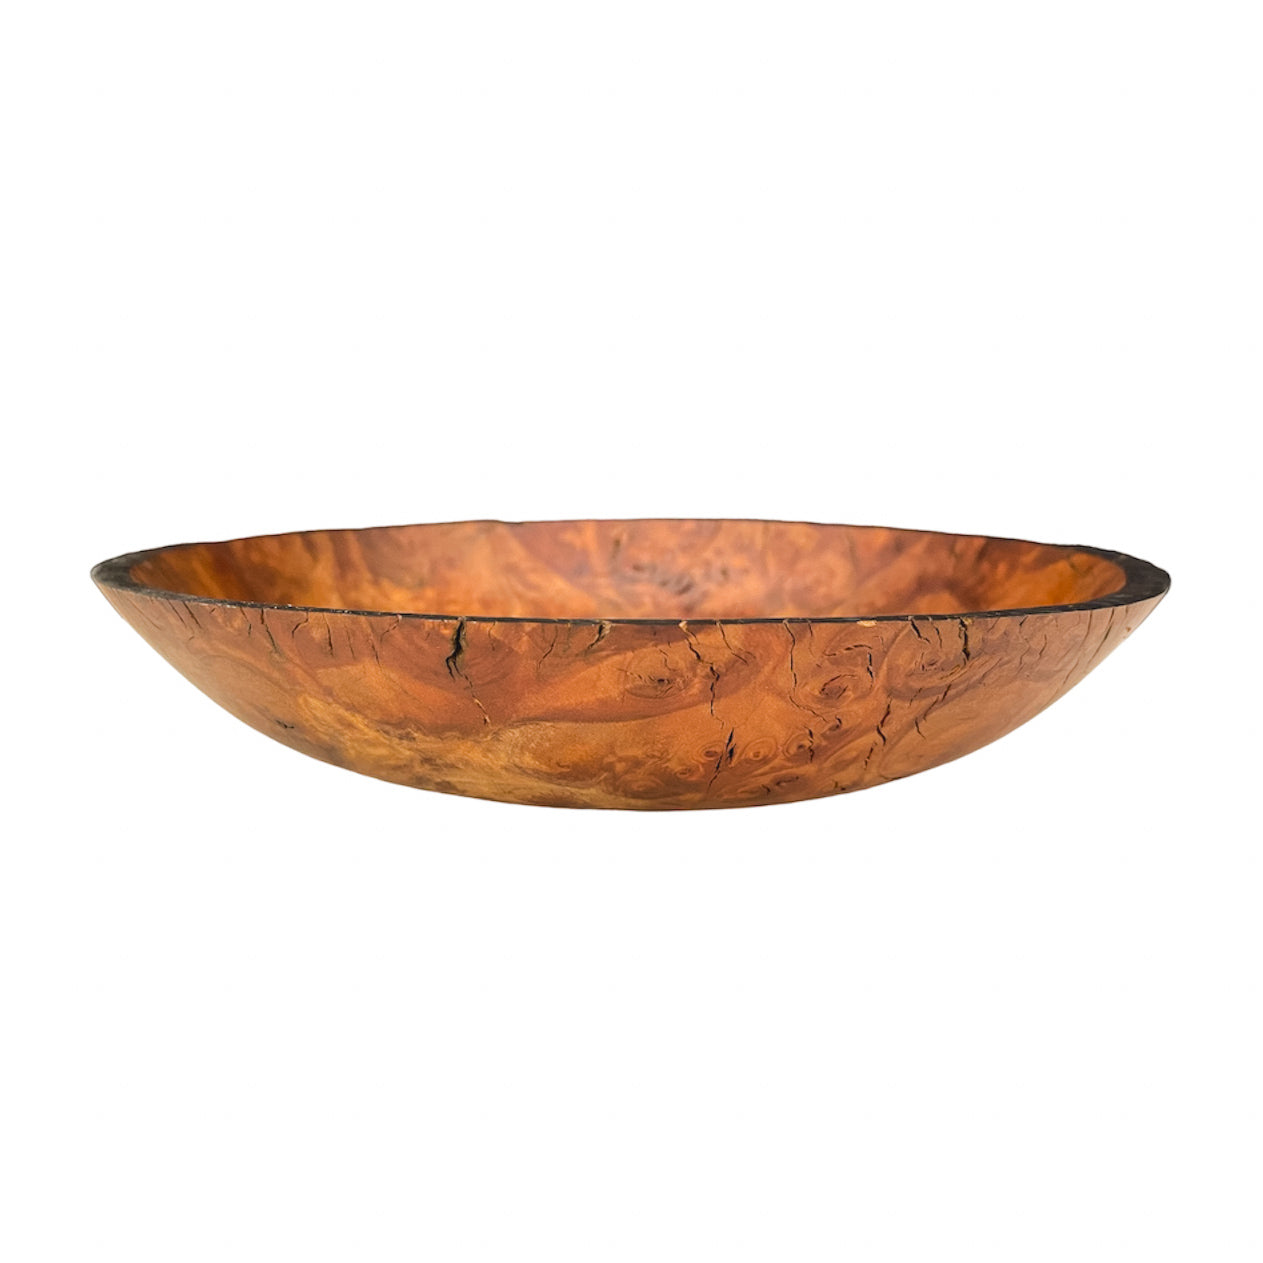 "TADHG" OPEN WOOD BOWL